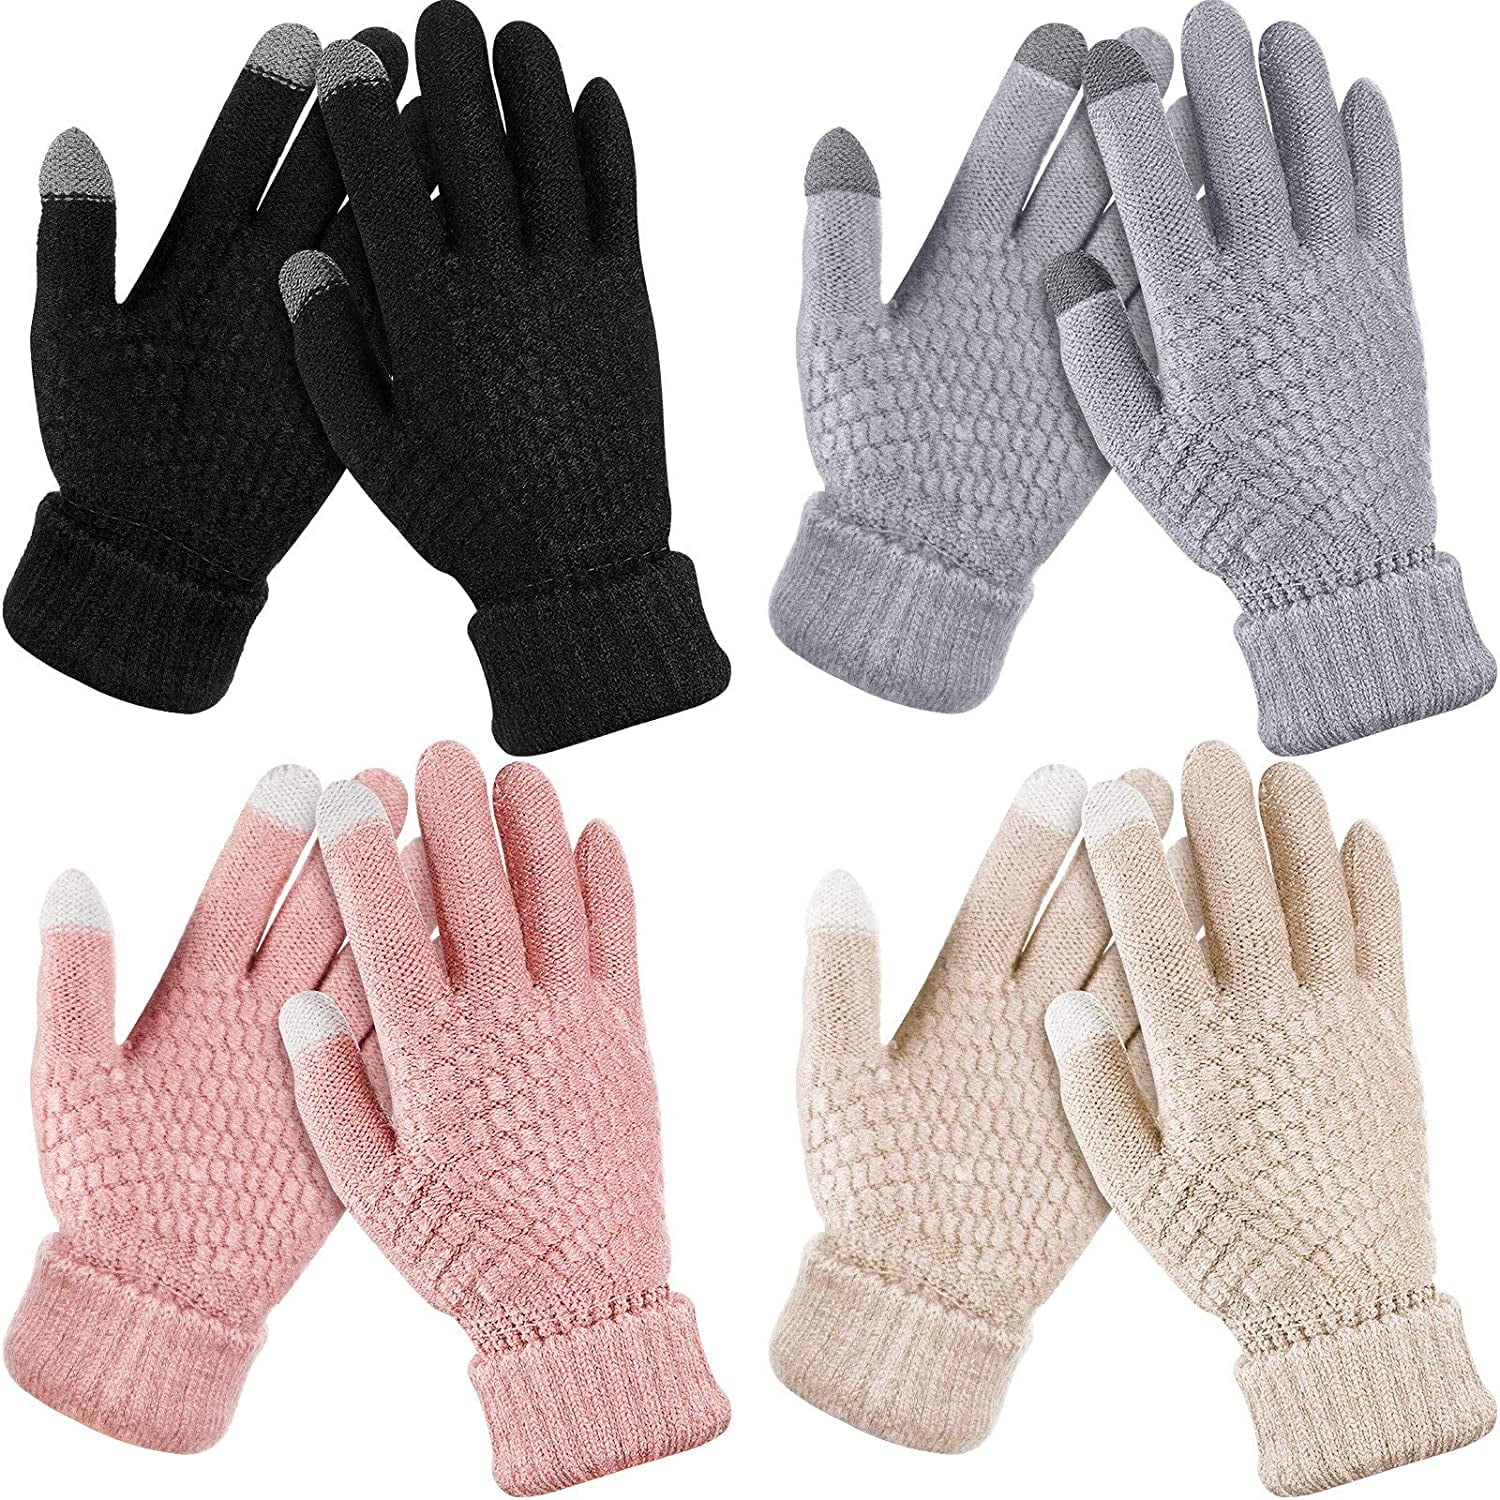 Winter Knit Warm Thicken Gloves Texting Thermal Fleece Wool Lined Touch Screen 